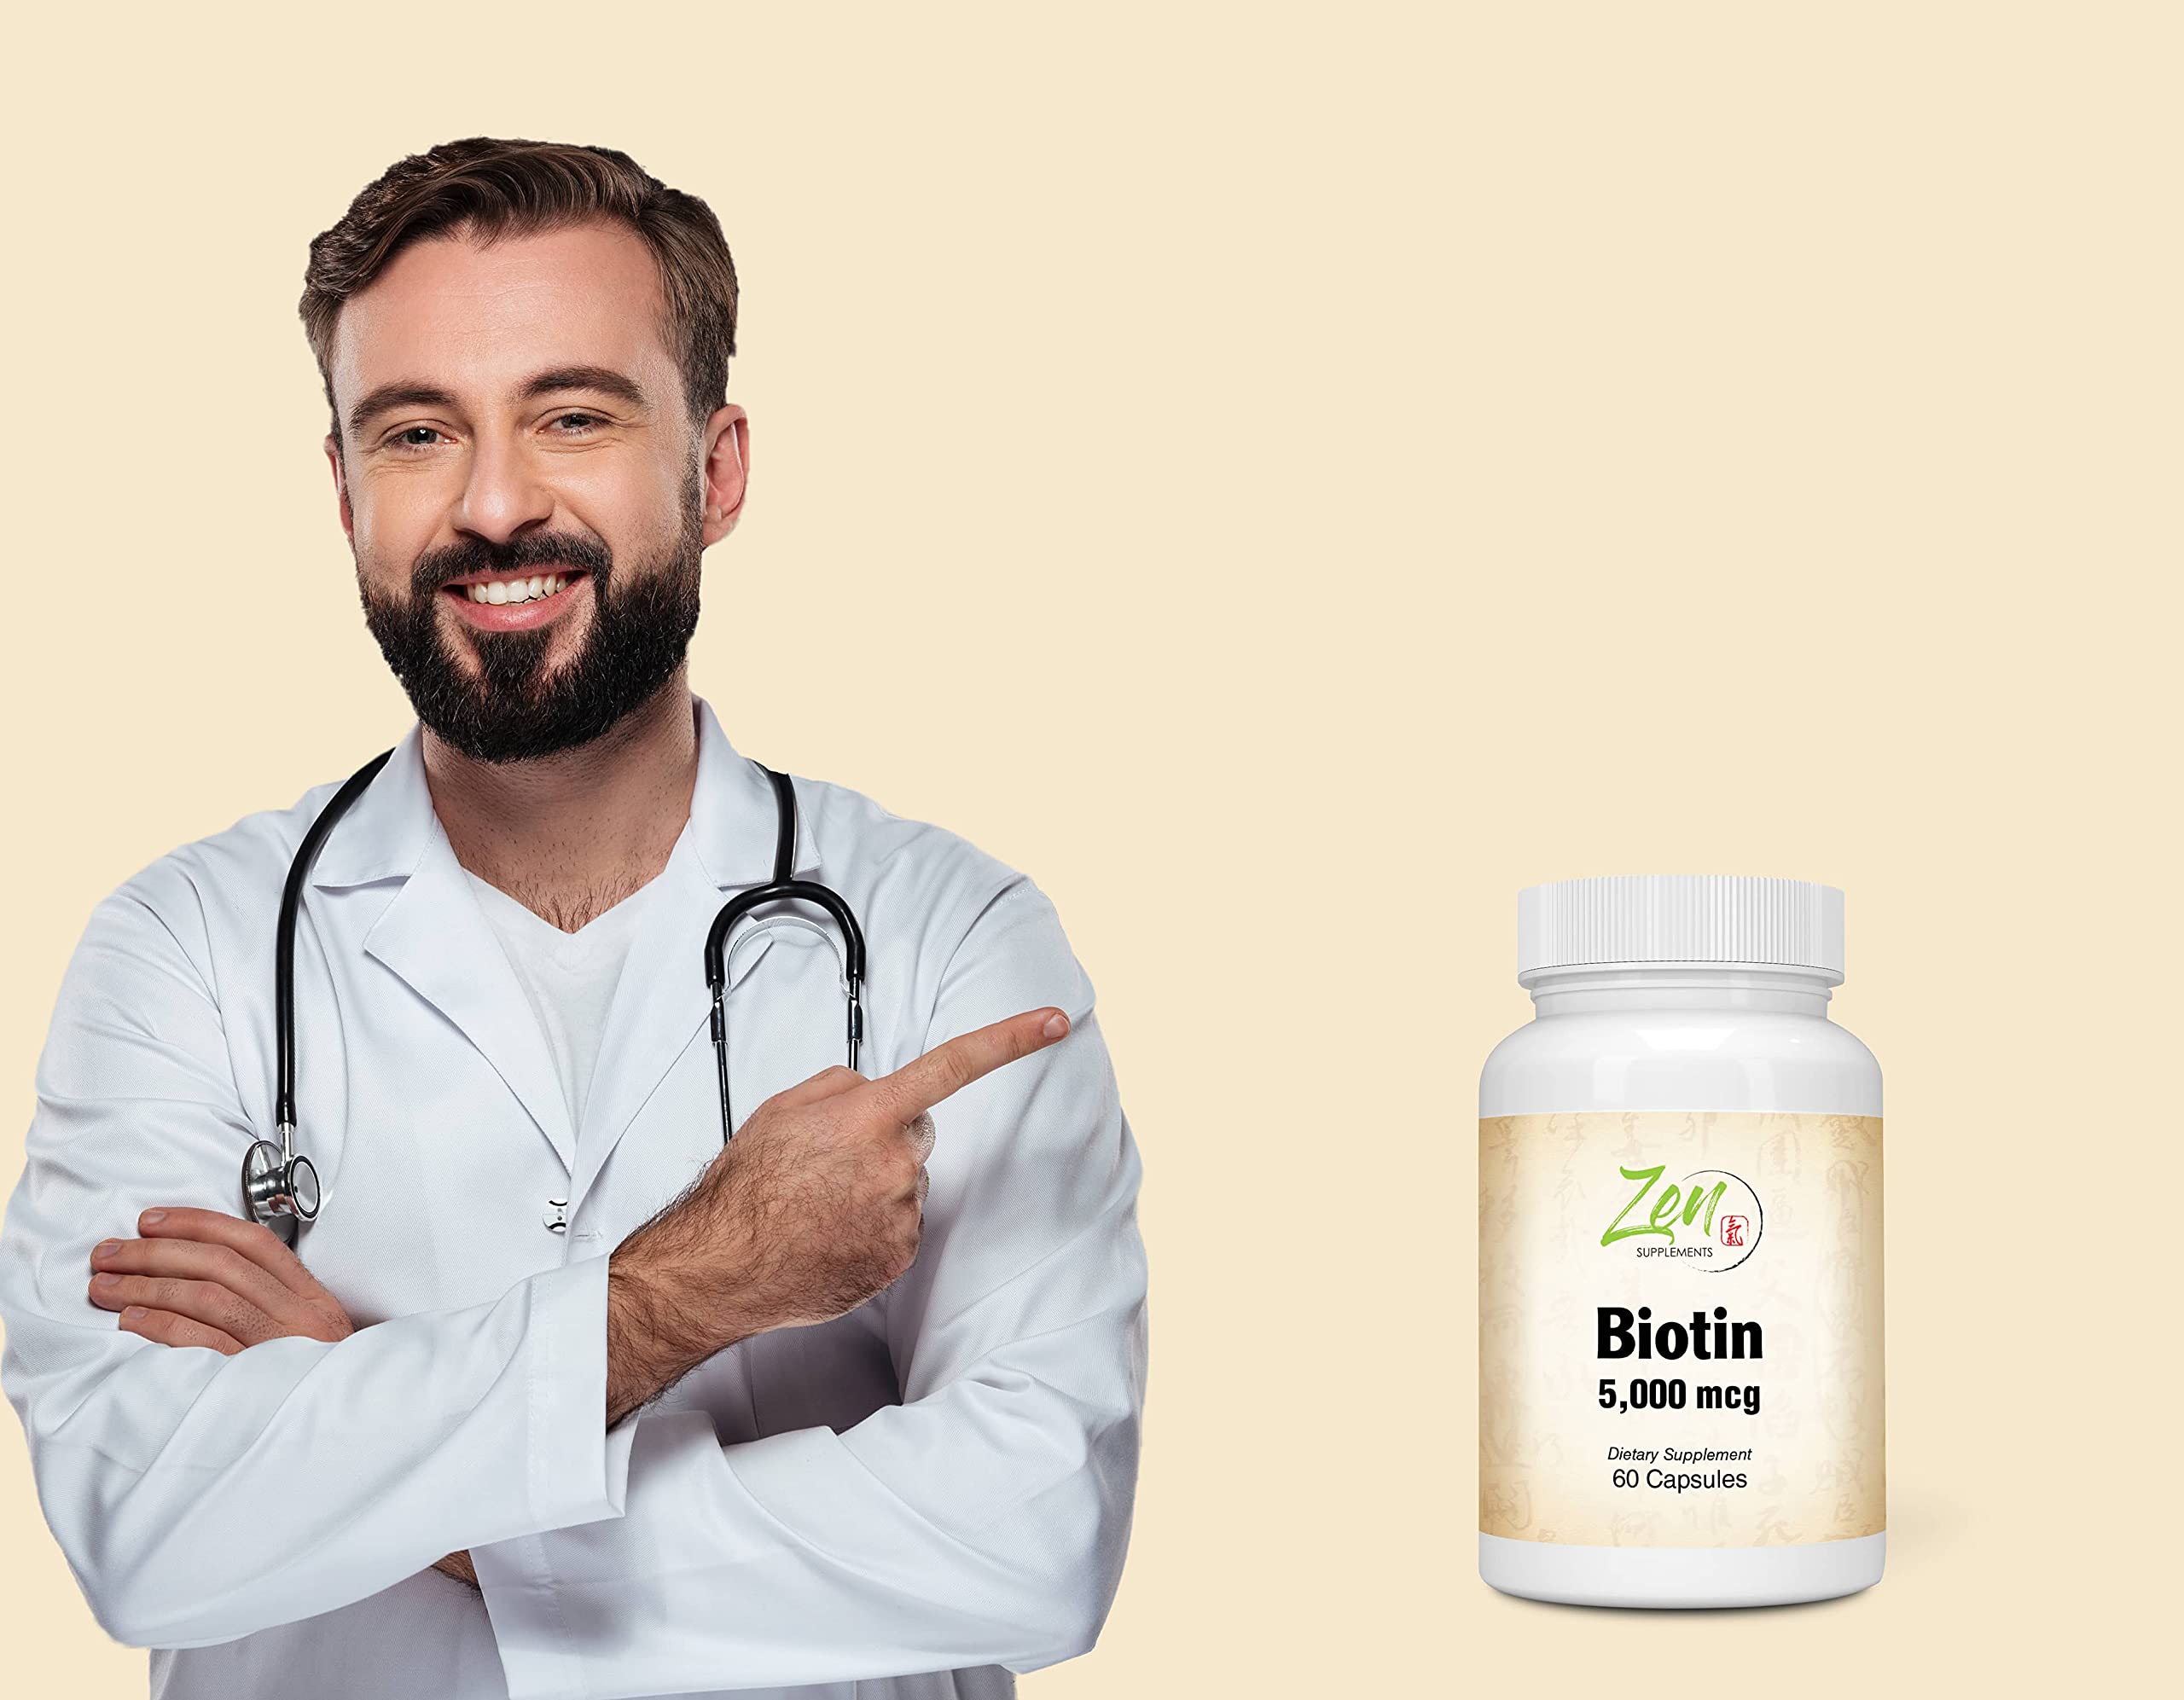 Zen Supplements - Biotin 5000 Mcg 60-Caps - Supports Healthy Hair, Skin & Nails in Individuals w/ Biotin Deficiency - May Provide for Hair Growth